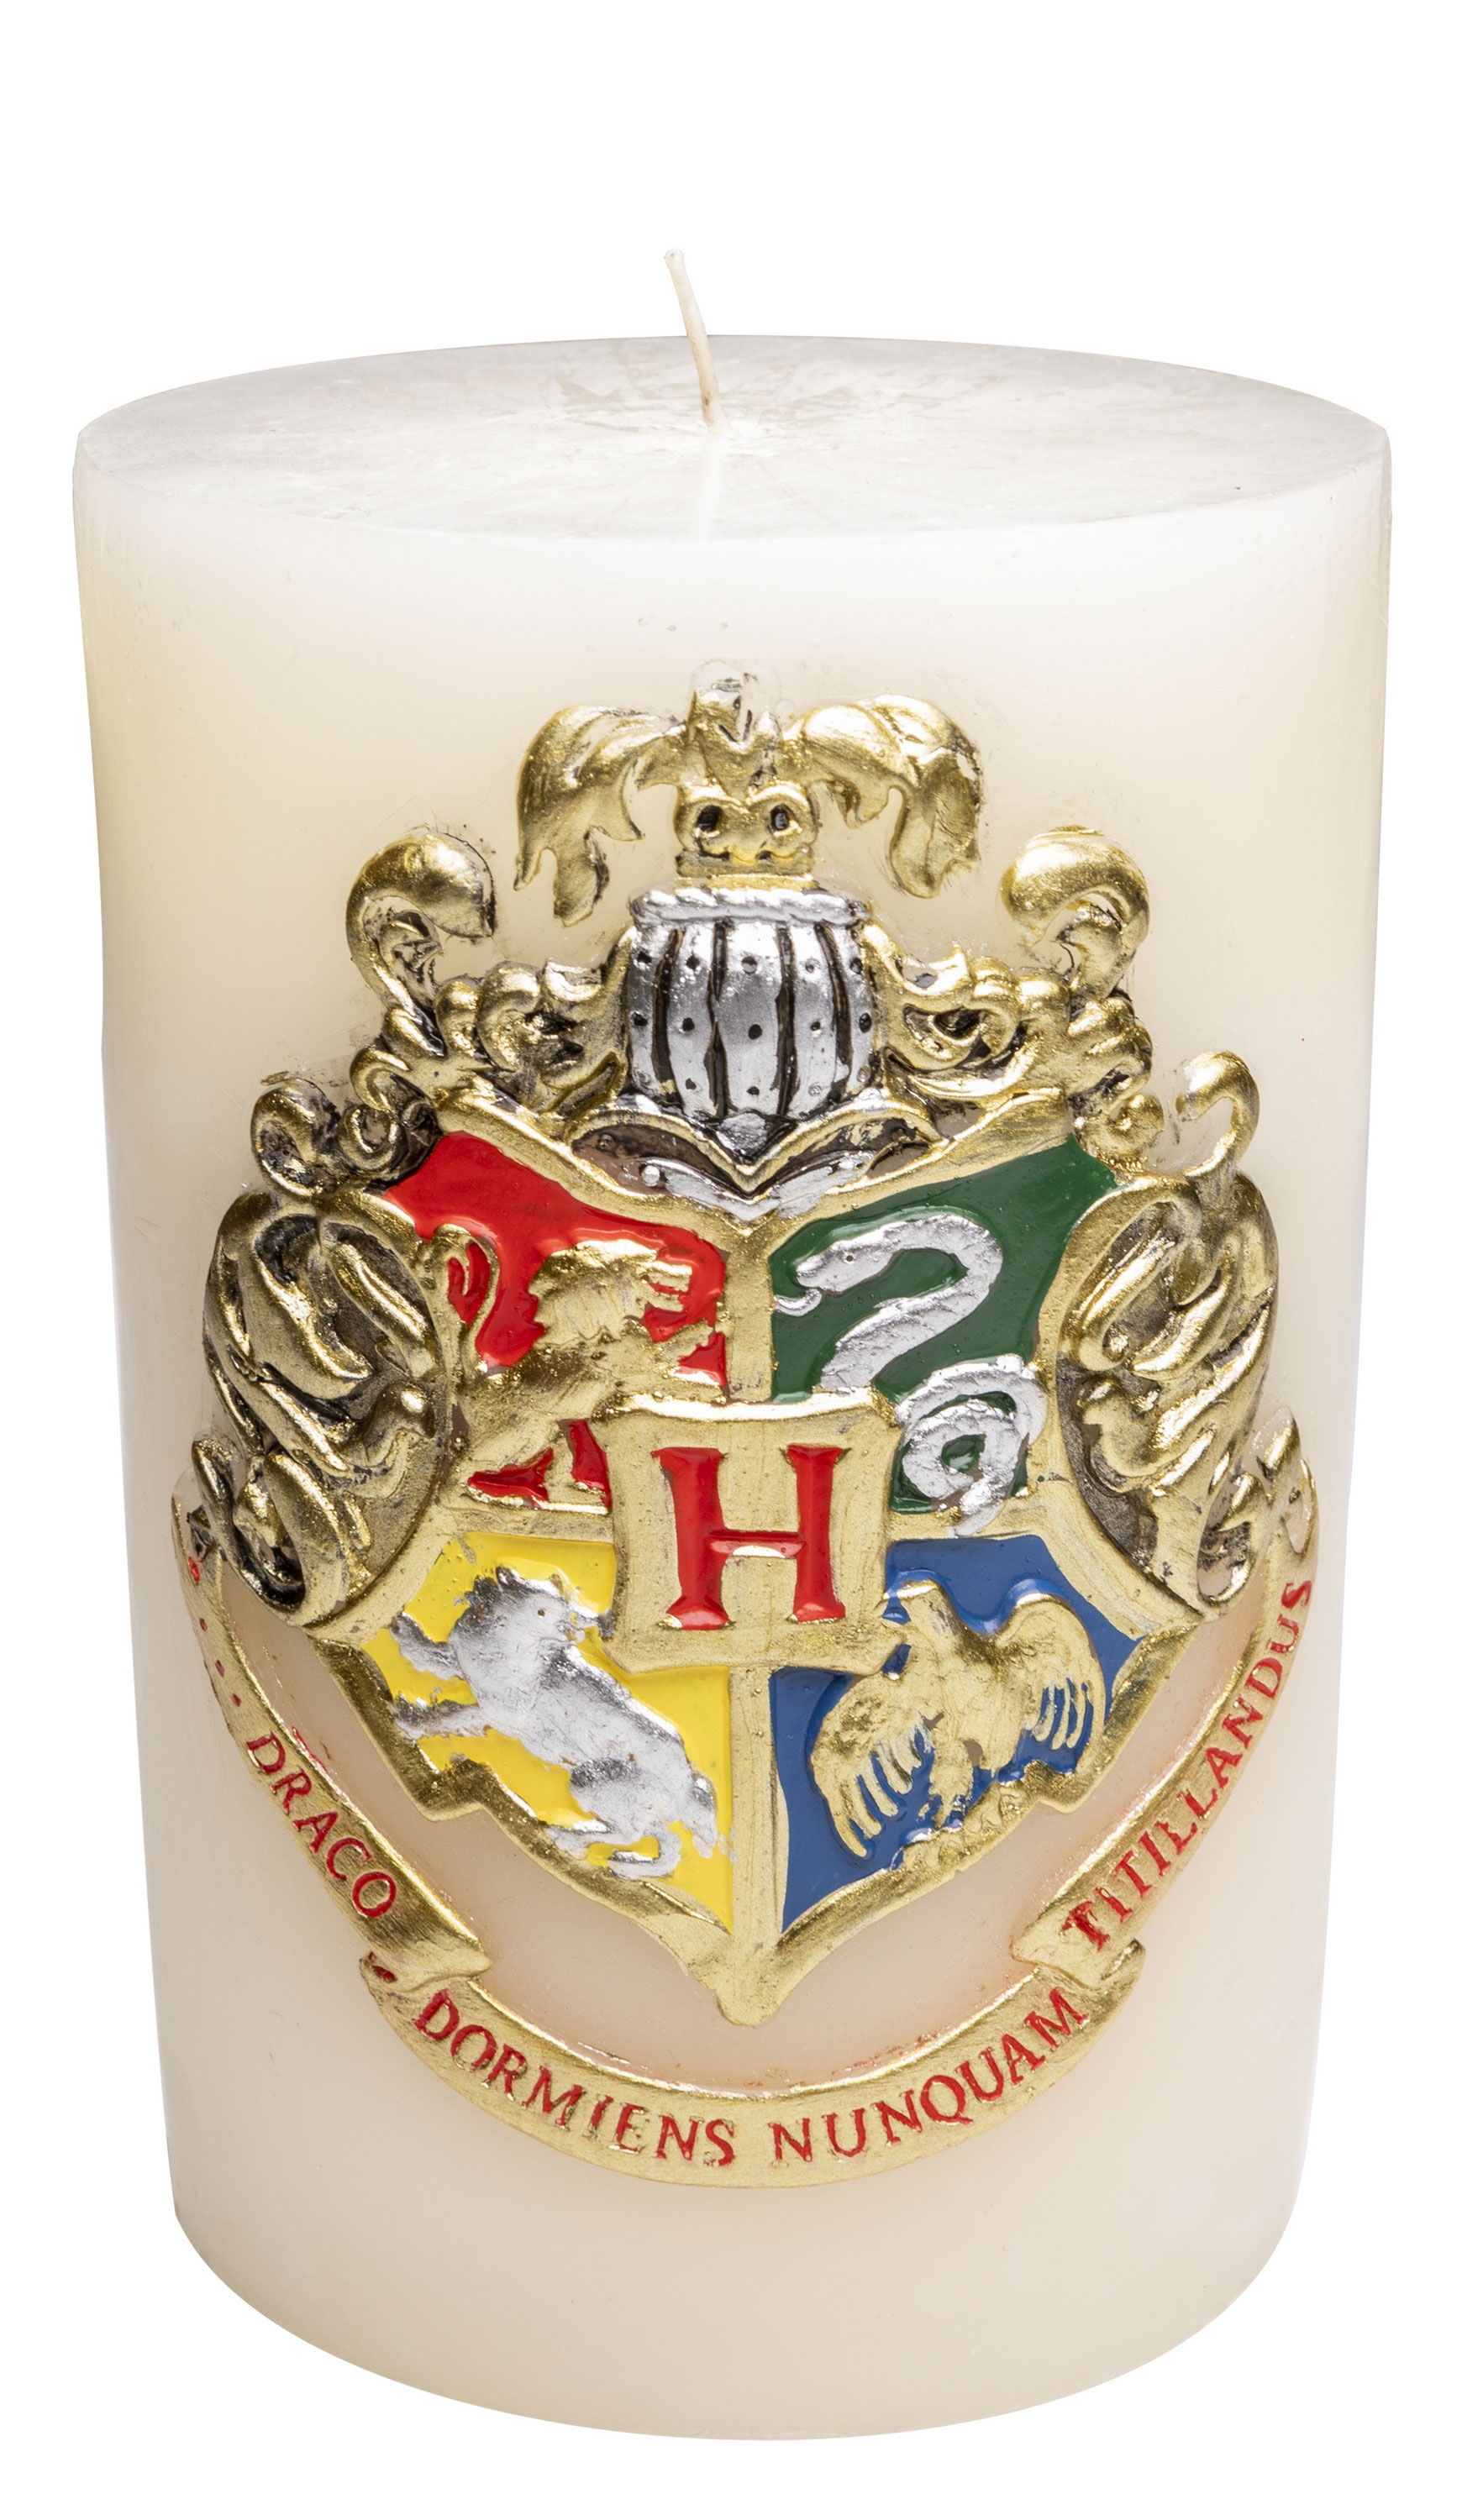 “Harry Potter” Luminary Sculpted Candle from Insight Editions, featuring the Hogwarts crest